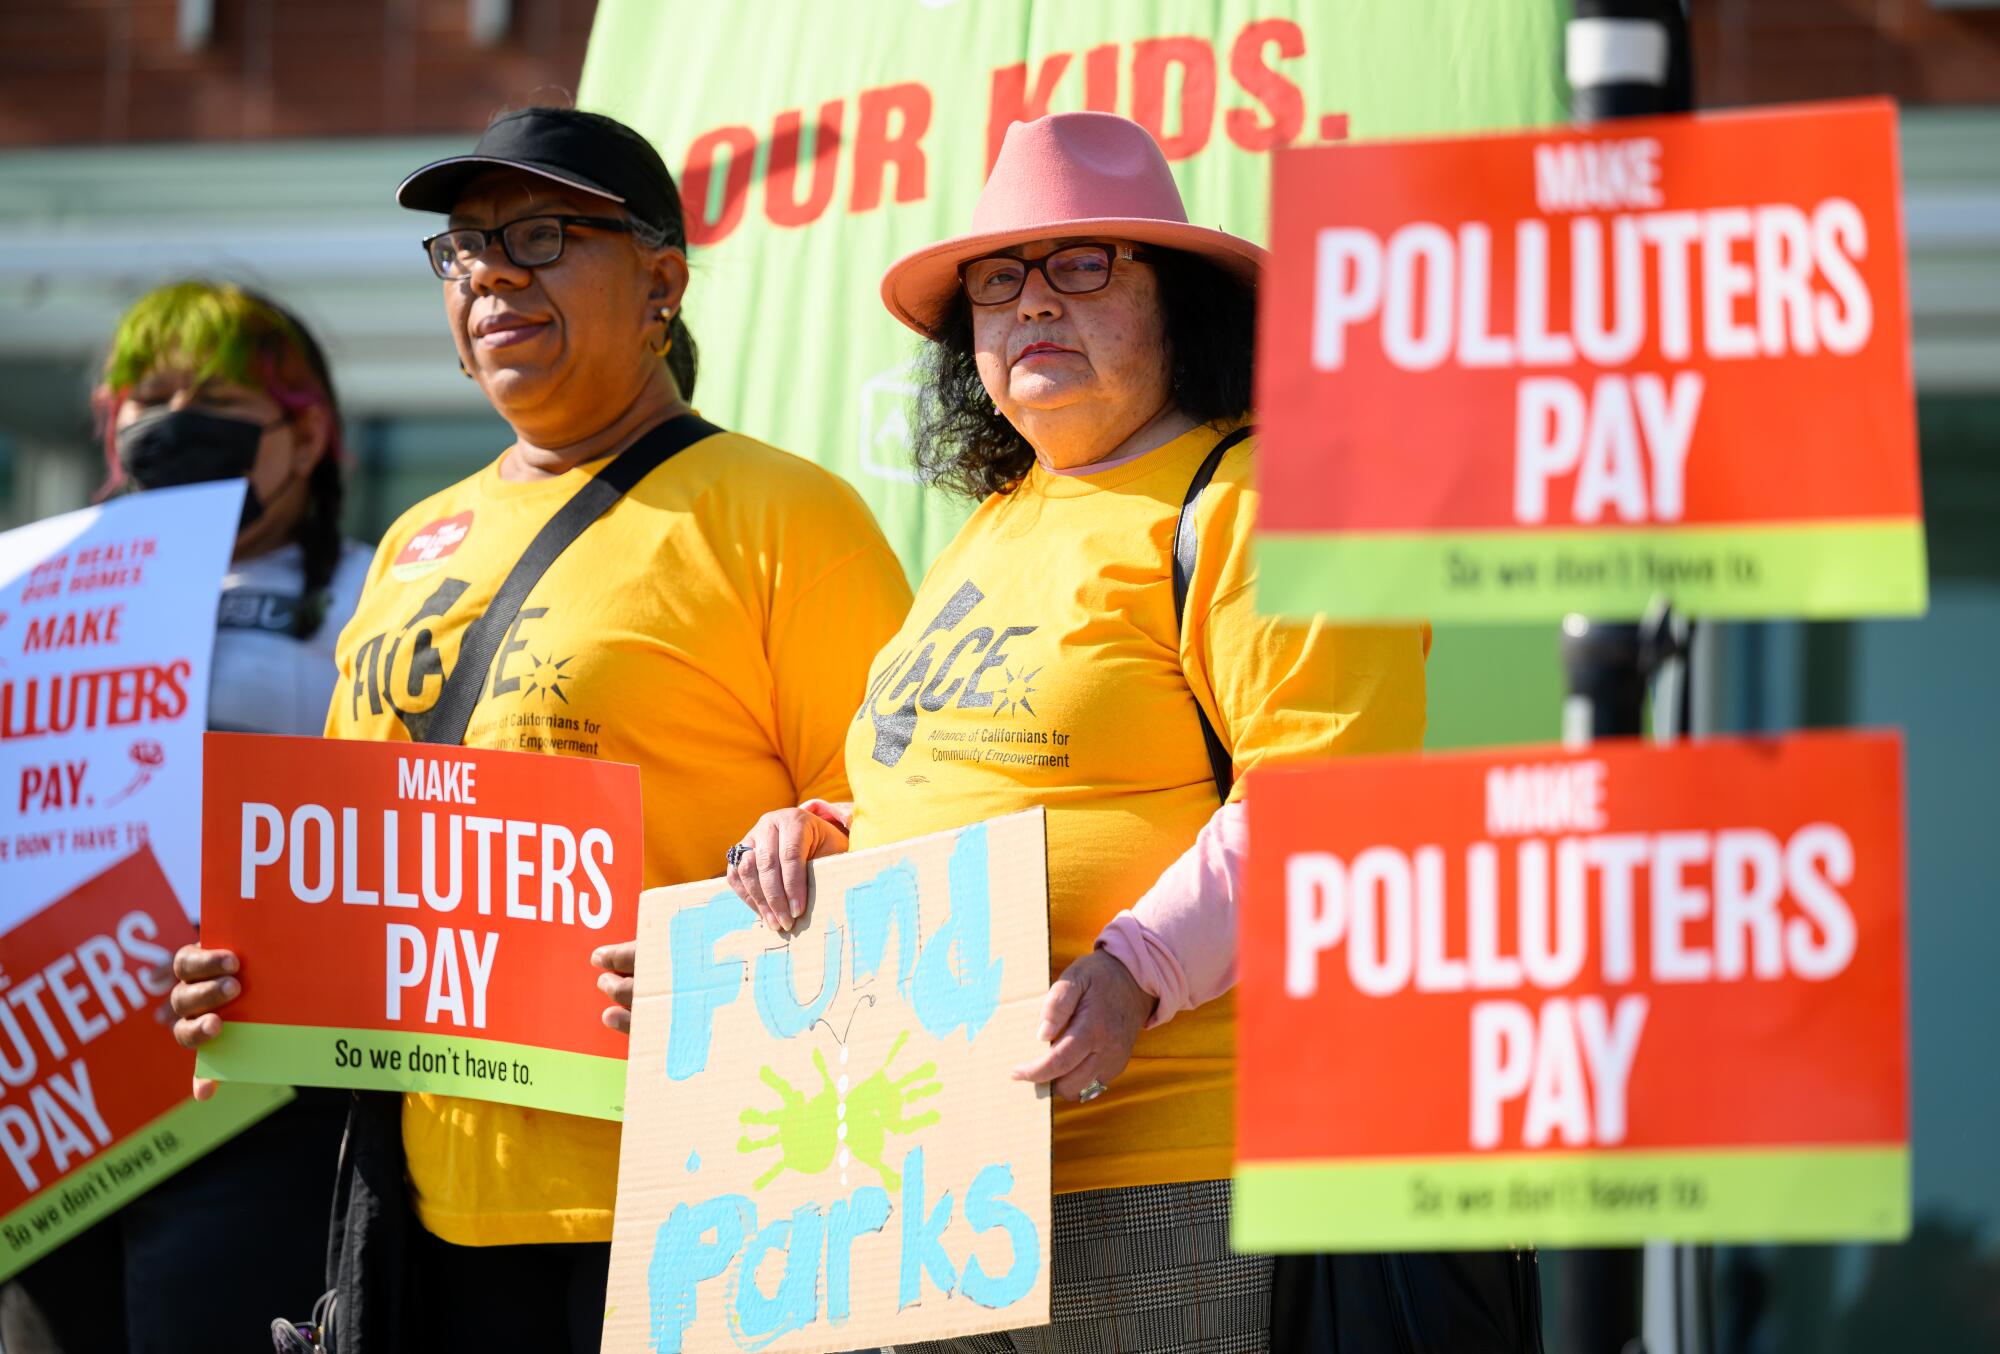 People hold signs that say "Make polluters pay."